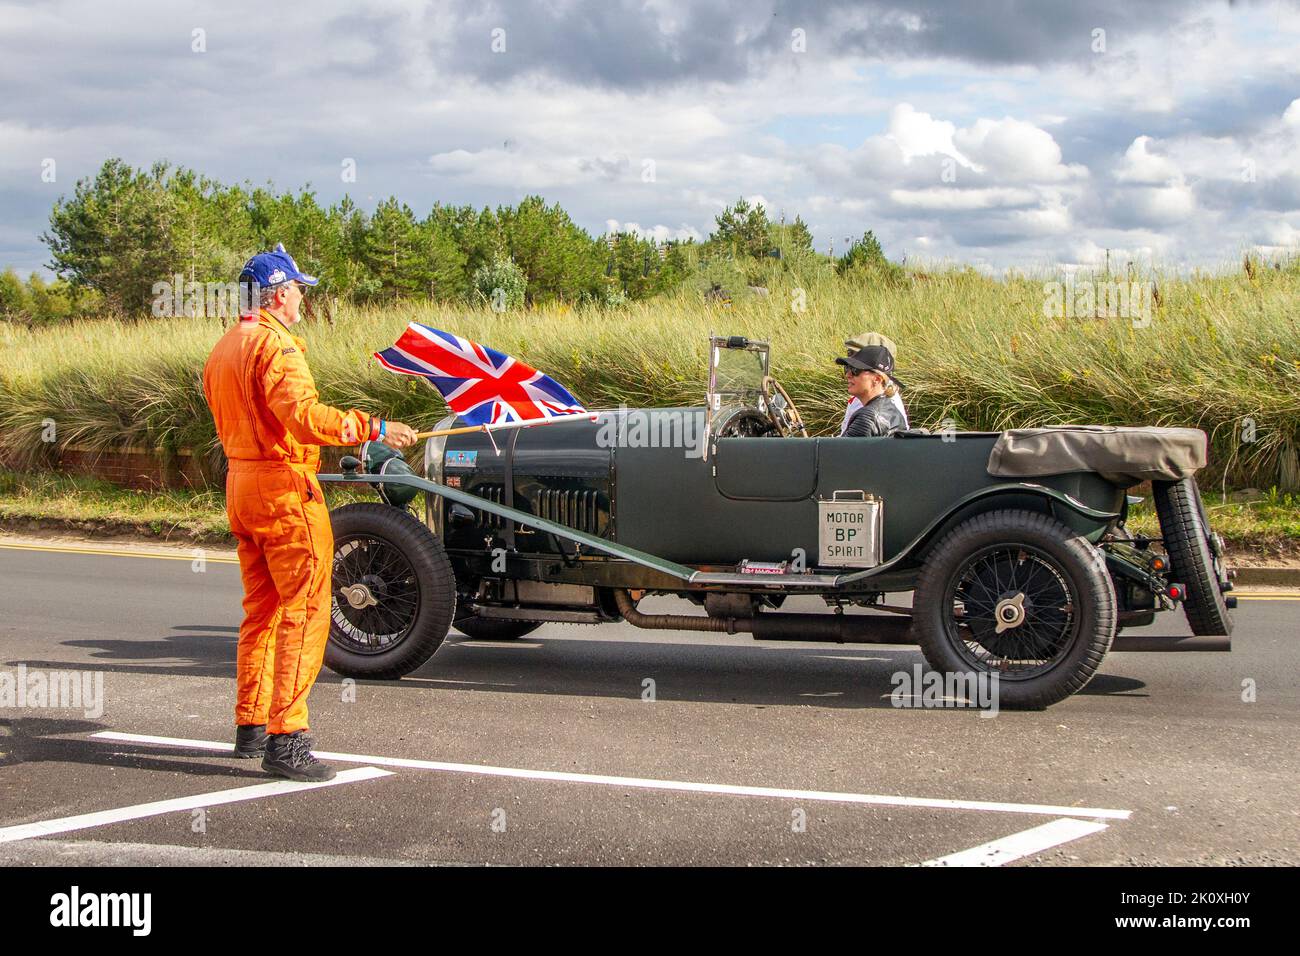 1922 20s twenties pre-war Green BENTLEY 2998cc petrol at the Southport Classic car and Speed event on the seafront promenade, UK Stock Photo